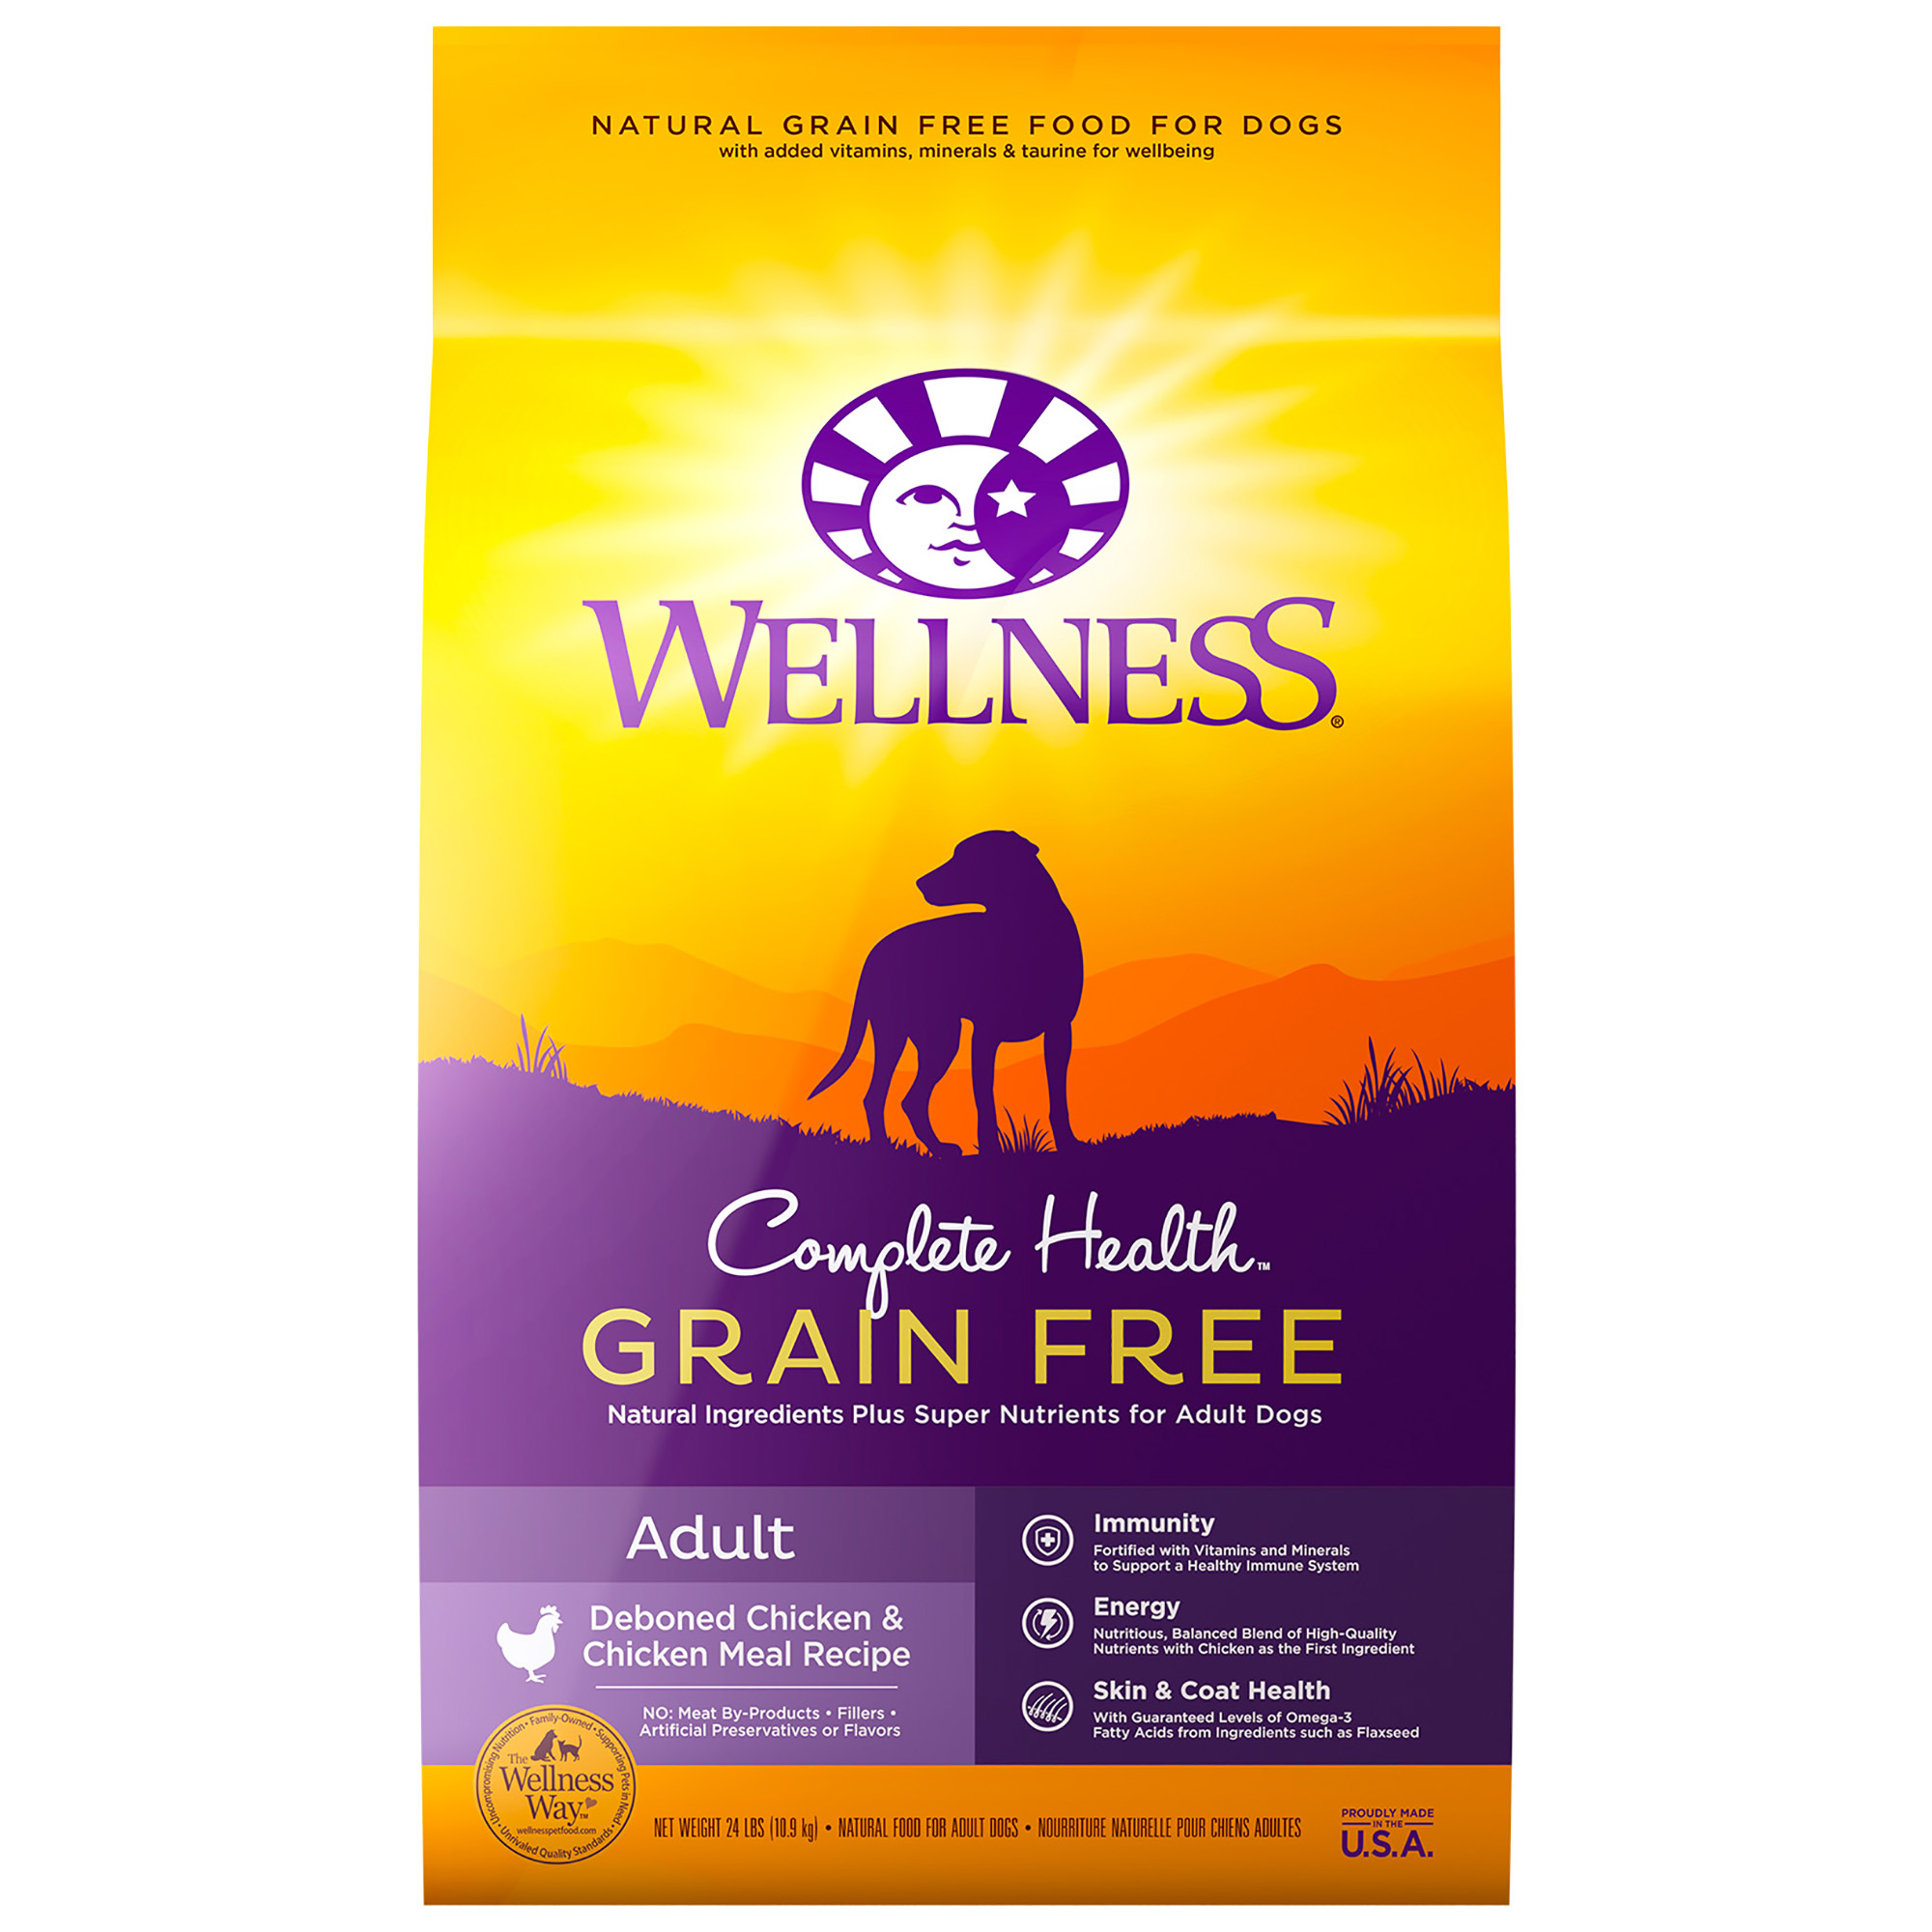 Wellness Complete Health Natural Grain Free Dry Dog Food, Chicken Recipe, 24-Pound Bag - image 1 of 9